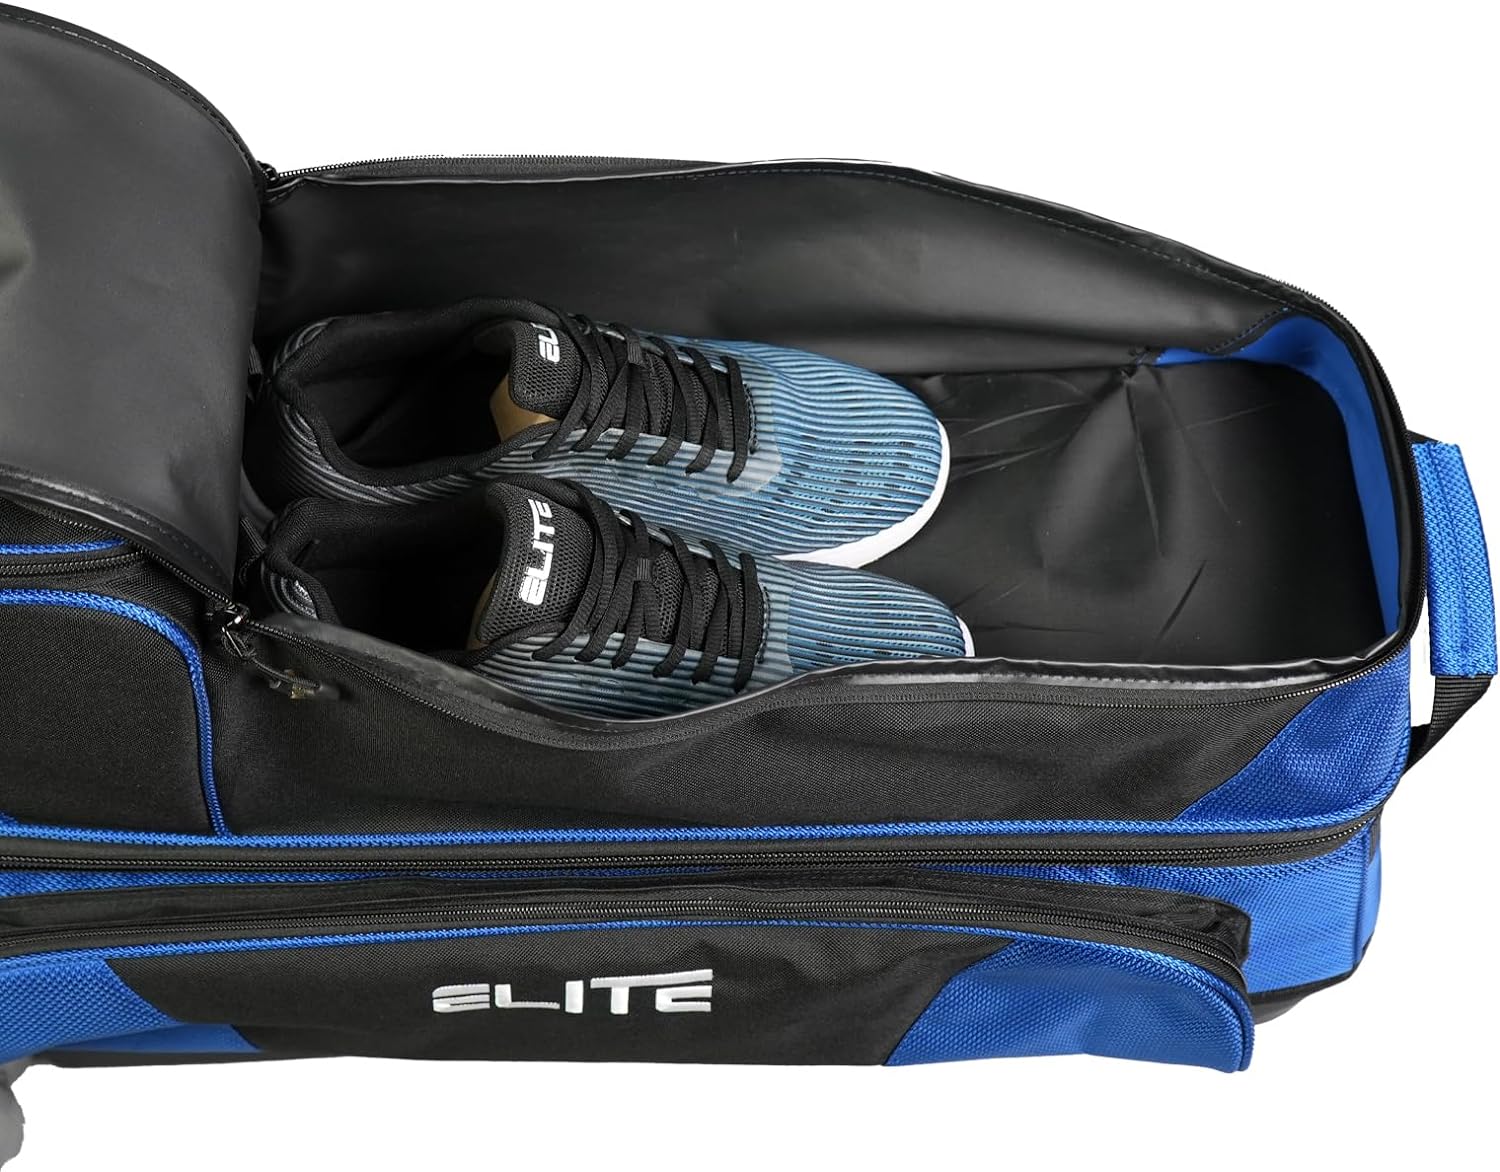 Elite Deluxe 3-4-5 Bowling Ball Roller Bag with (4) 5 Smooth Wheels - 4 Large Accessory Pockets, Shoe Compartment, Extendable Handle